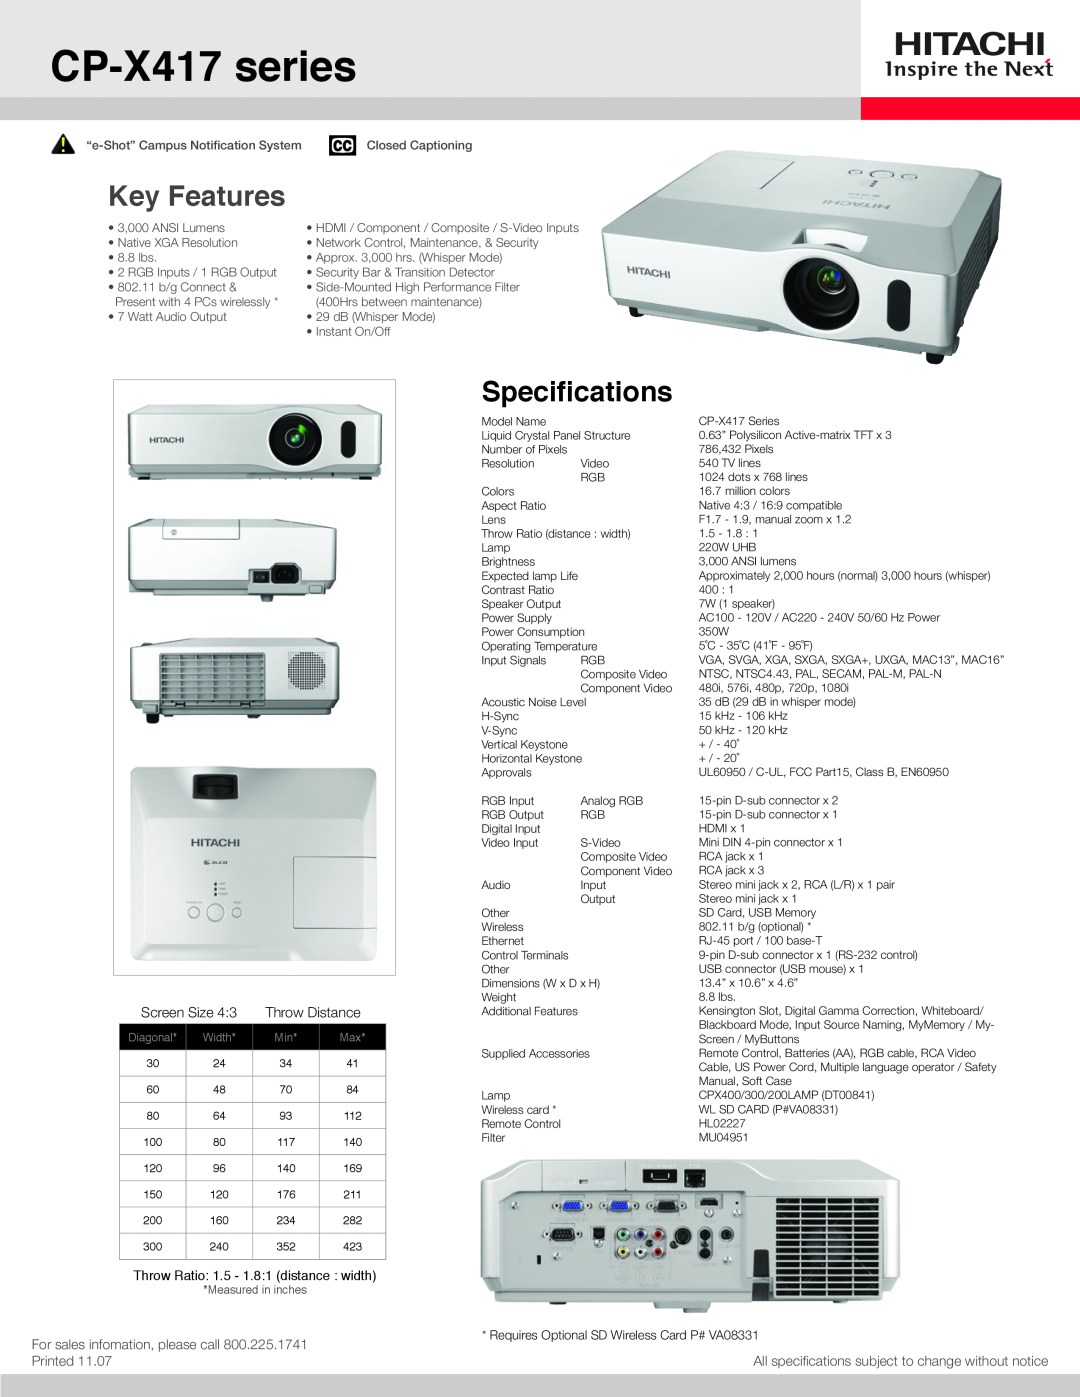 Hitachi specifications CP-X417 series, Key Features, Specifications, Screen Size, Throw Distance, Printed, Diagonal 